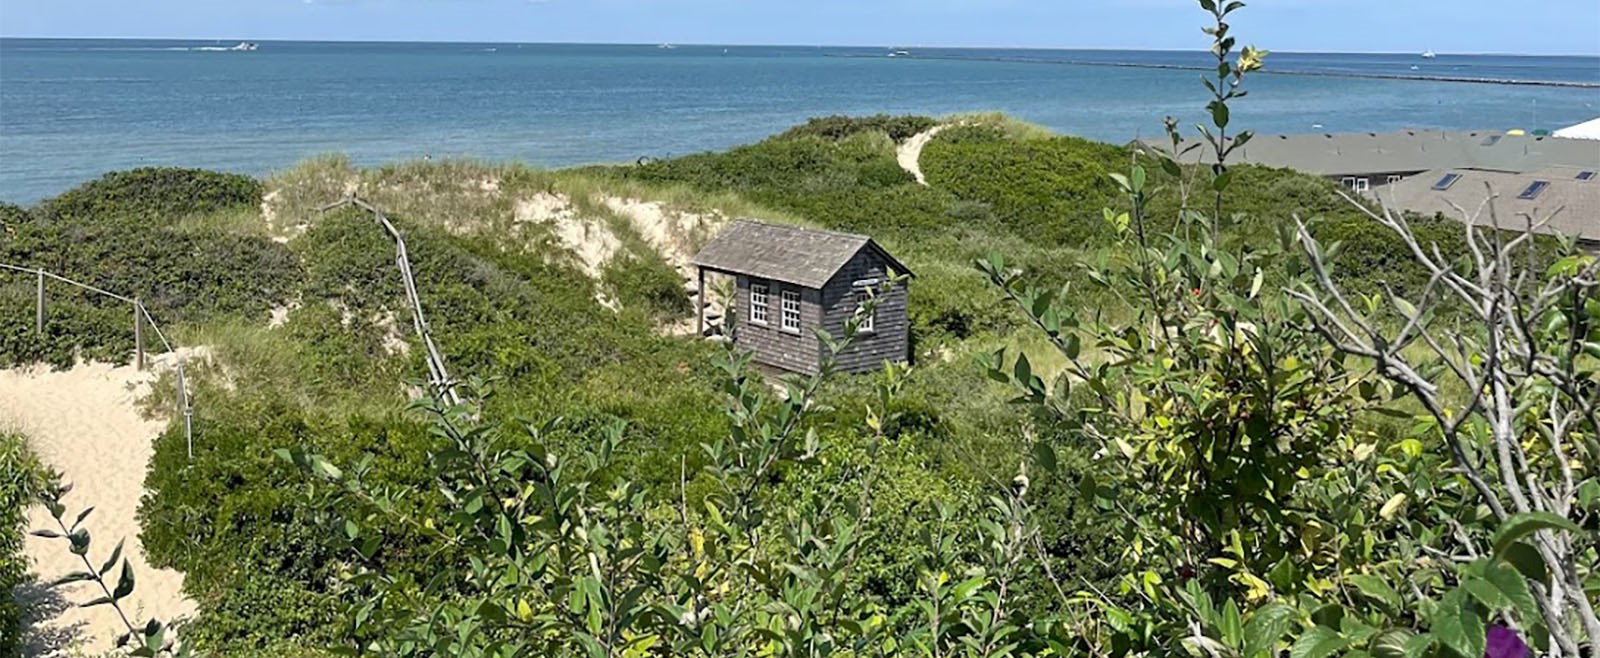 Stroll along the beautiful cobblestone streets of Nantucket this September. Breathe in the sweet scents of early fall and embrace the spirit of the new season by attending the following festive events!